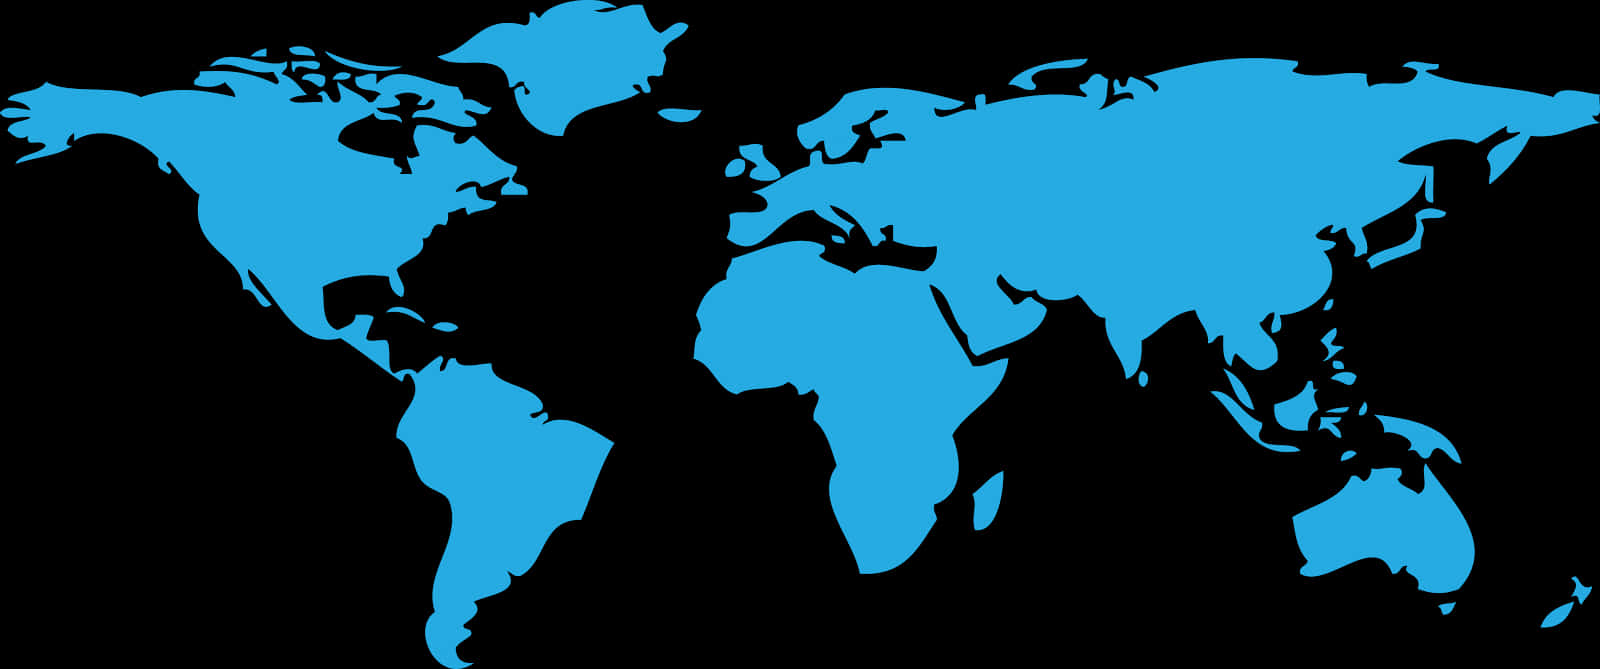 Simplified World Map Blueon Black PNG